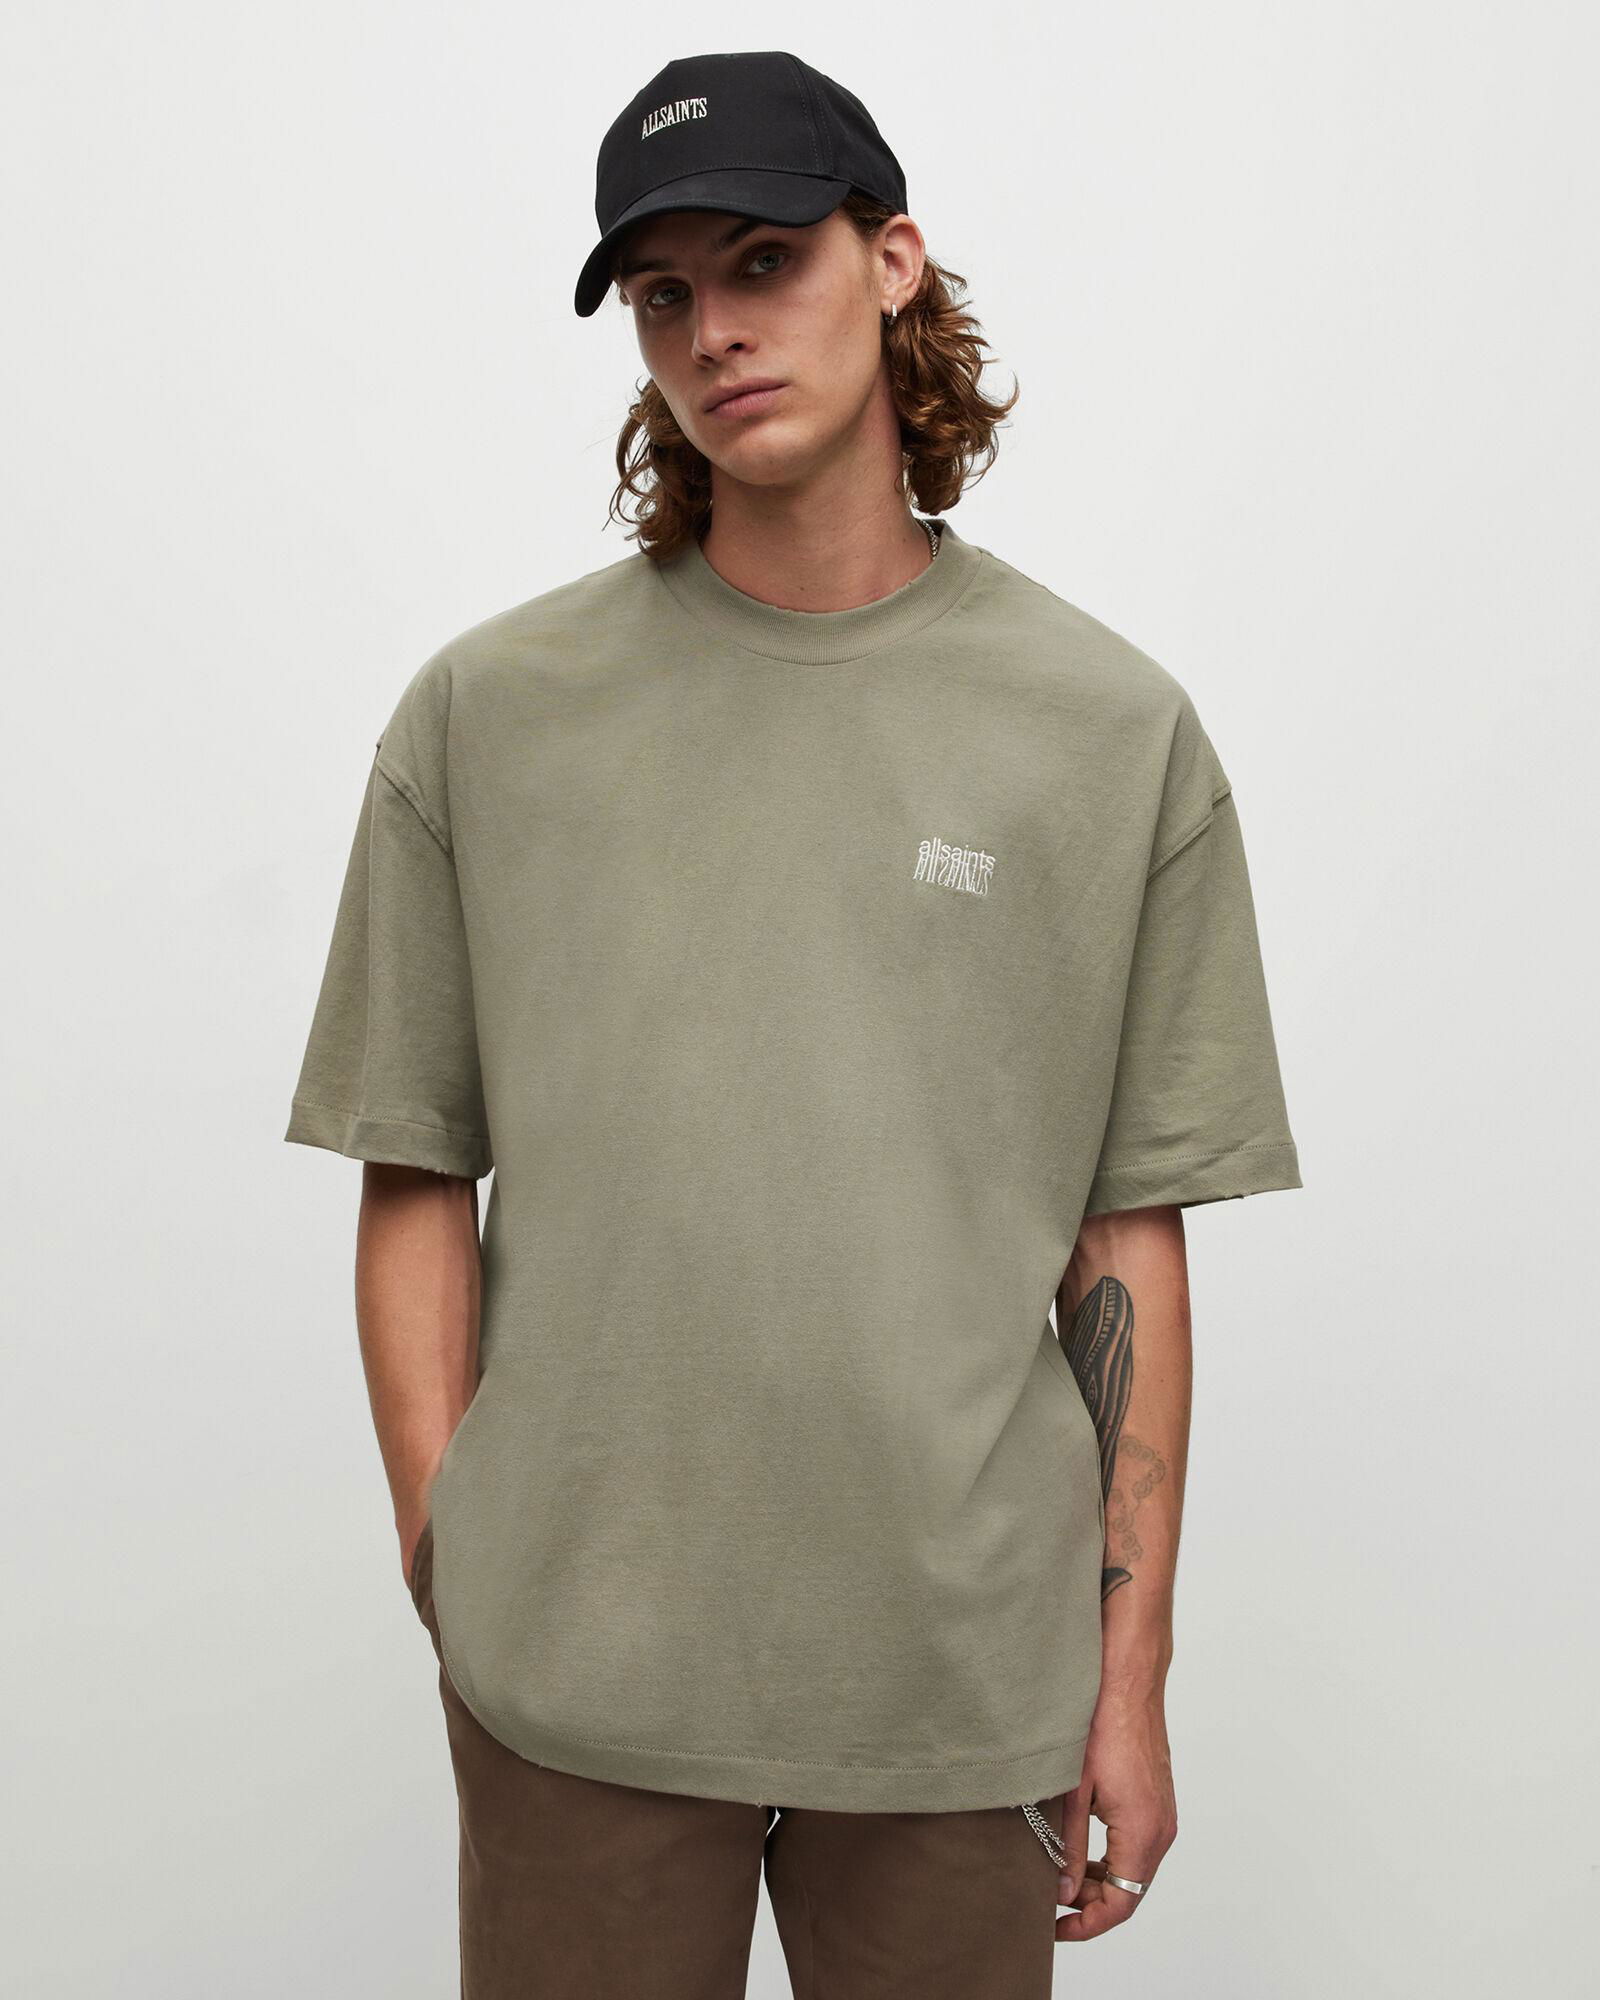 Jaxon Oversized Embroidered Crew T-Shirt by ALLSAINTS